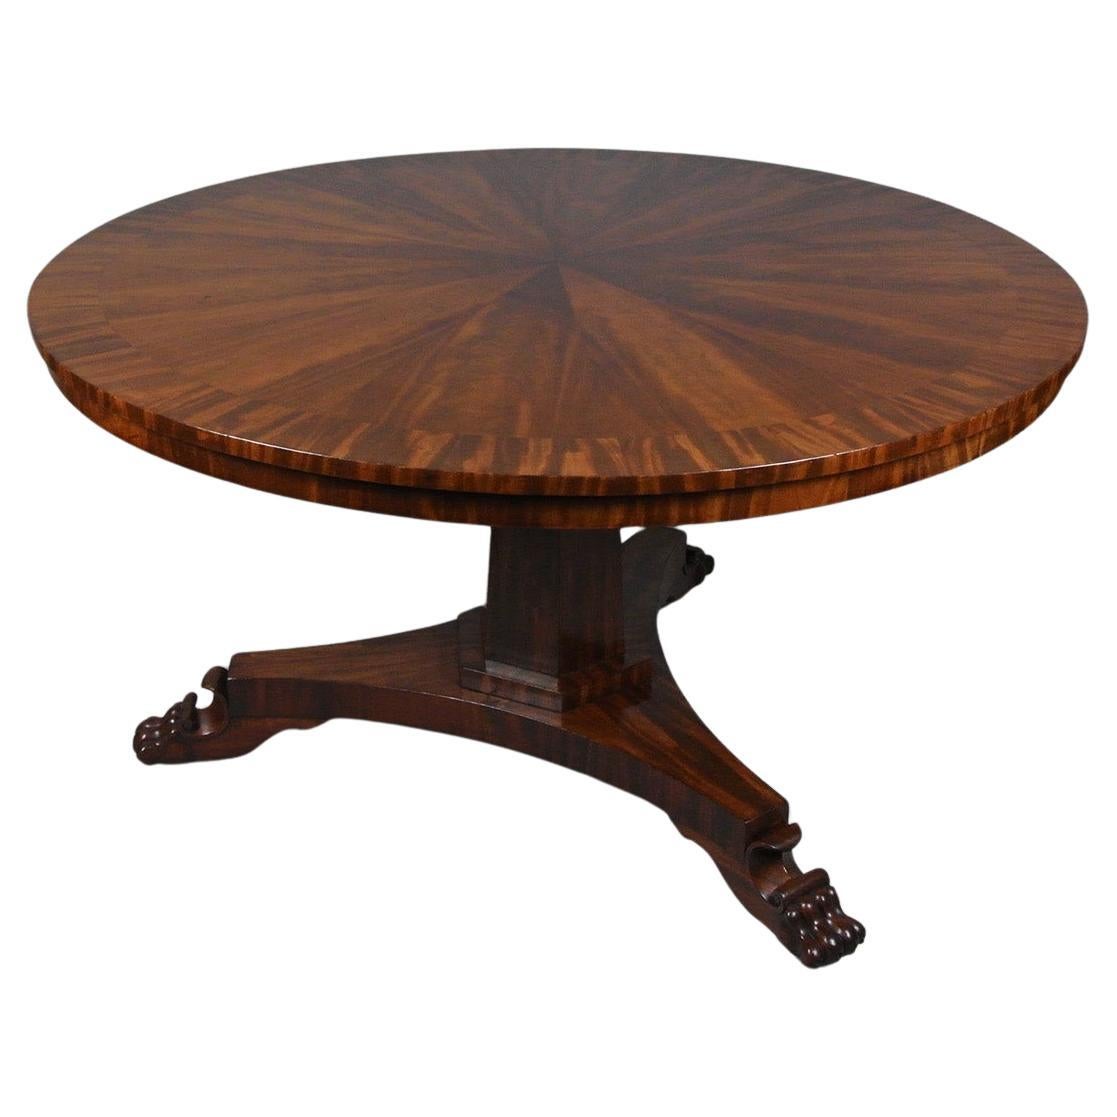 Very Fine Regency Circular and Radial Flame Mahogany Dining Table c. 1825